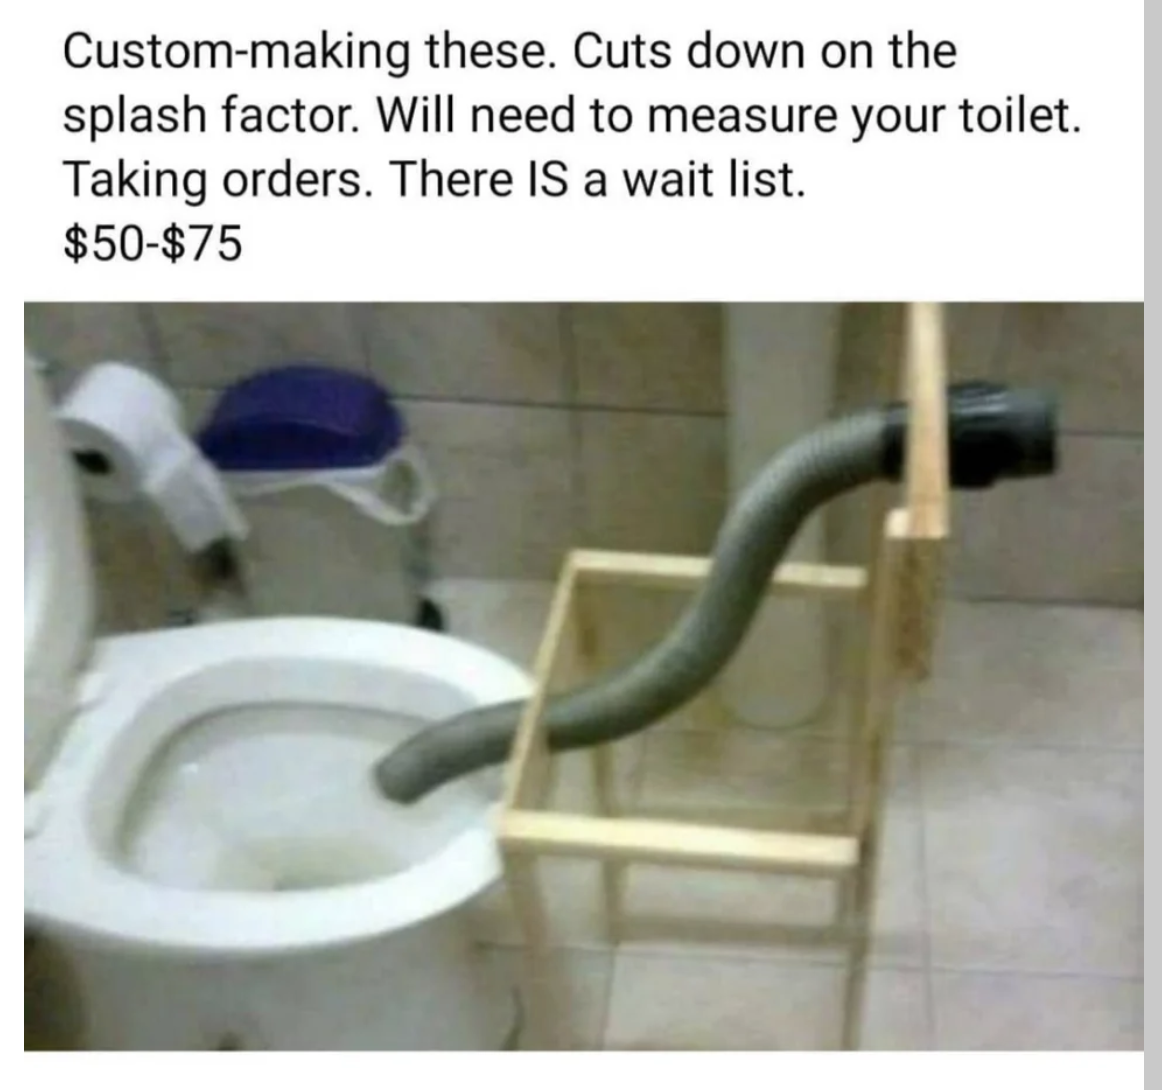 A man selling a contraption for your toilet